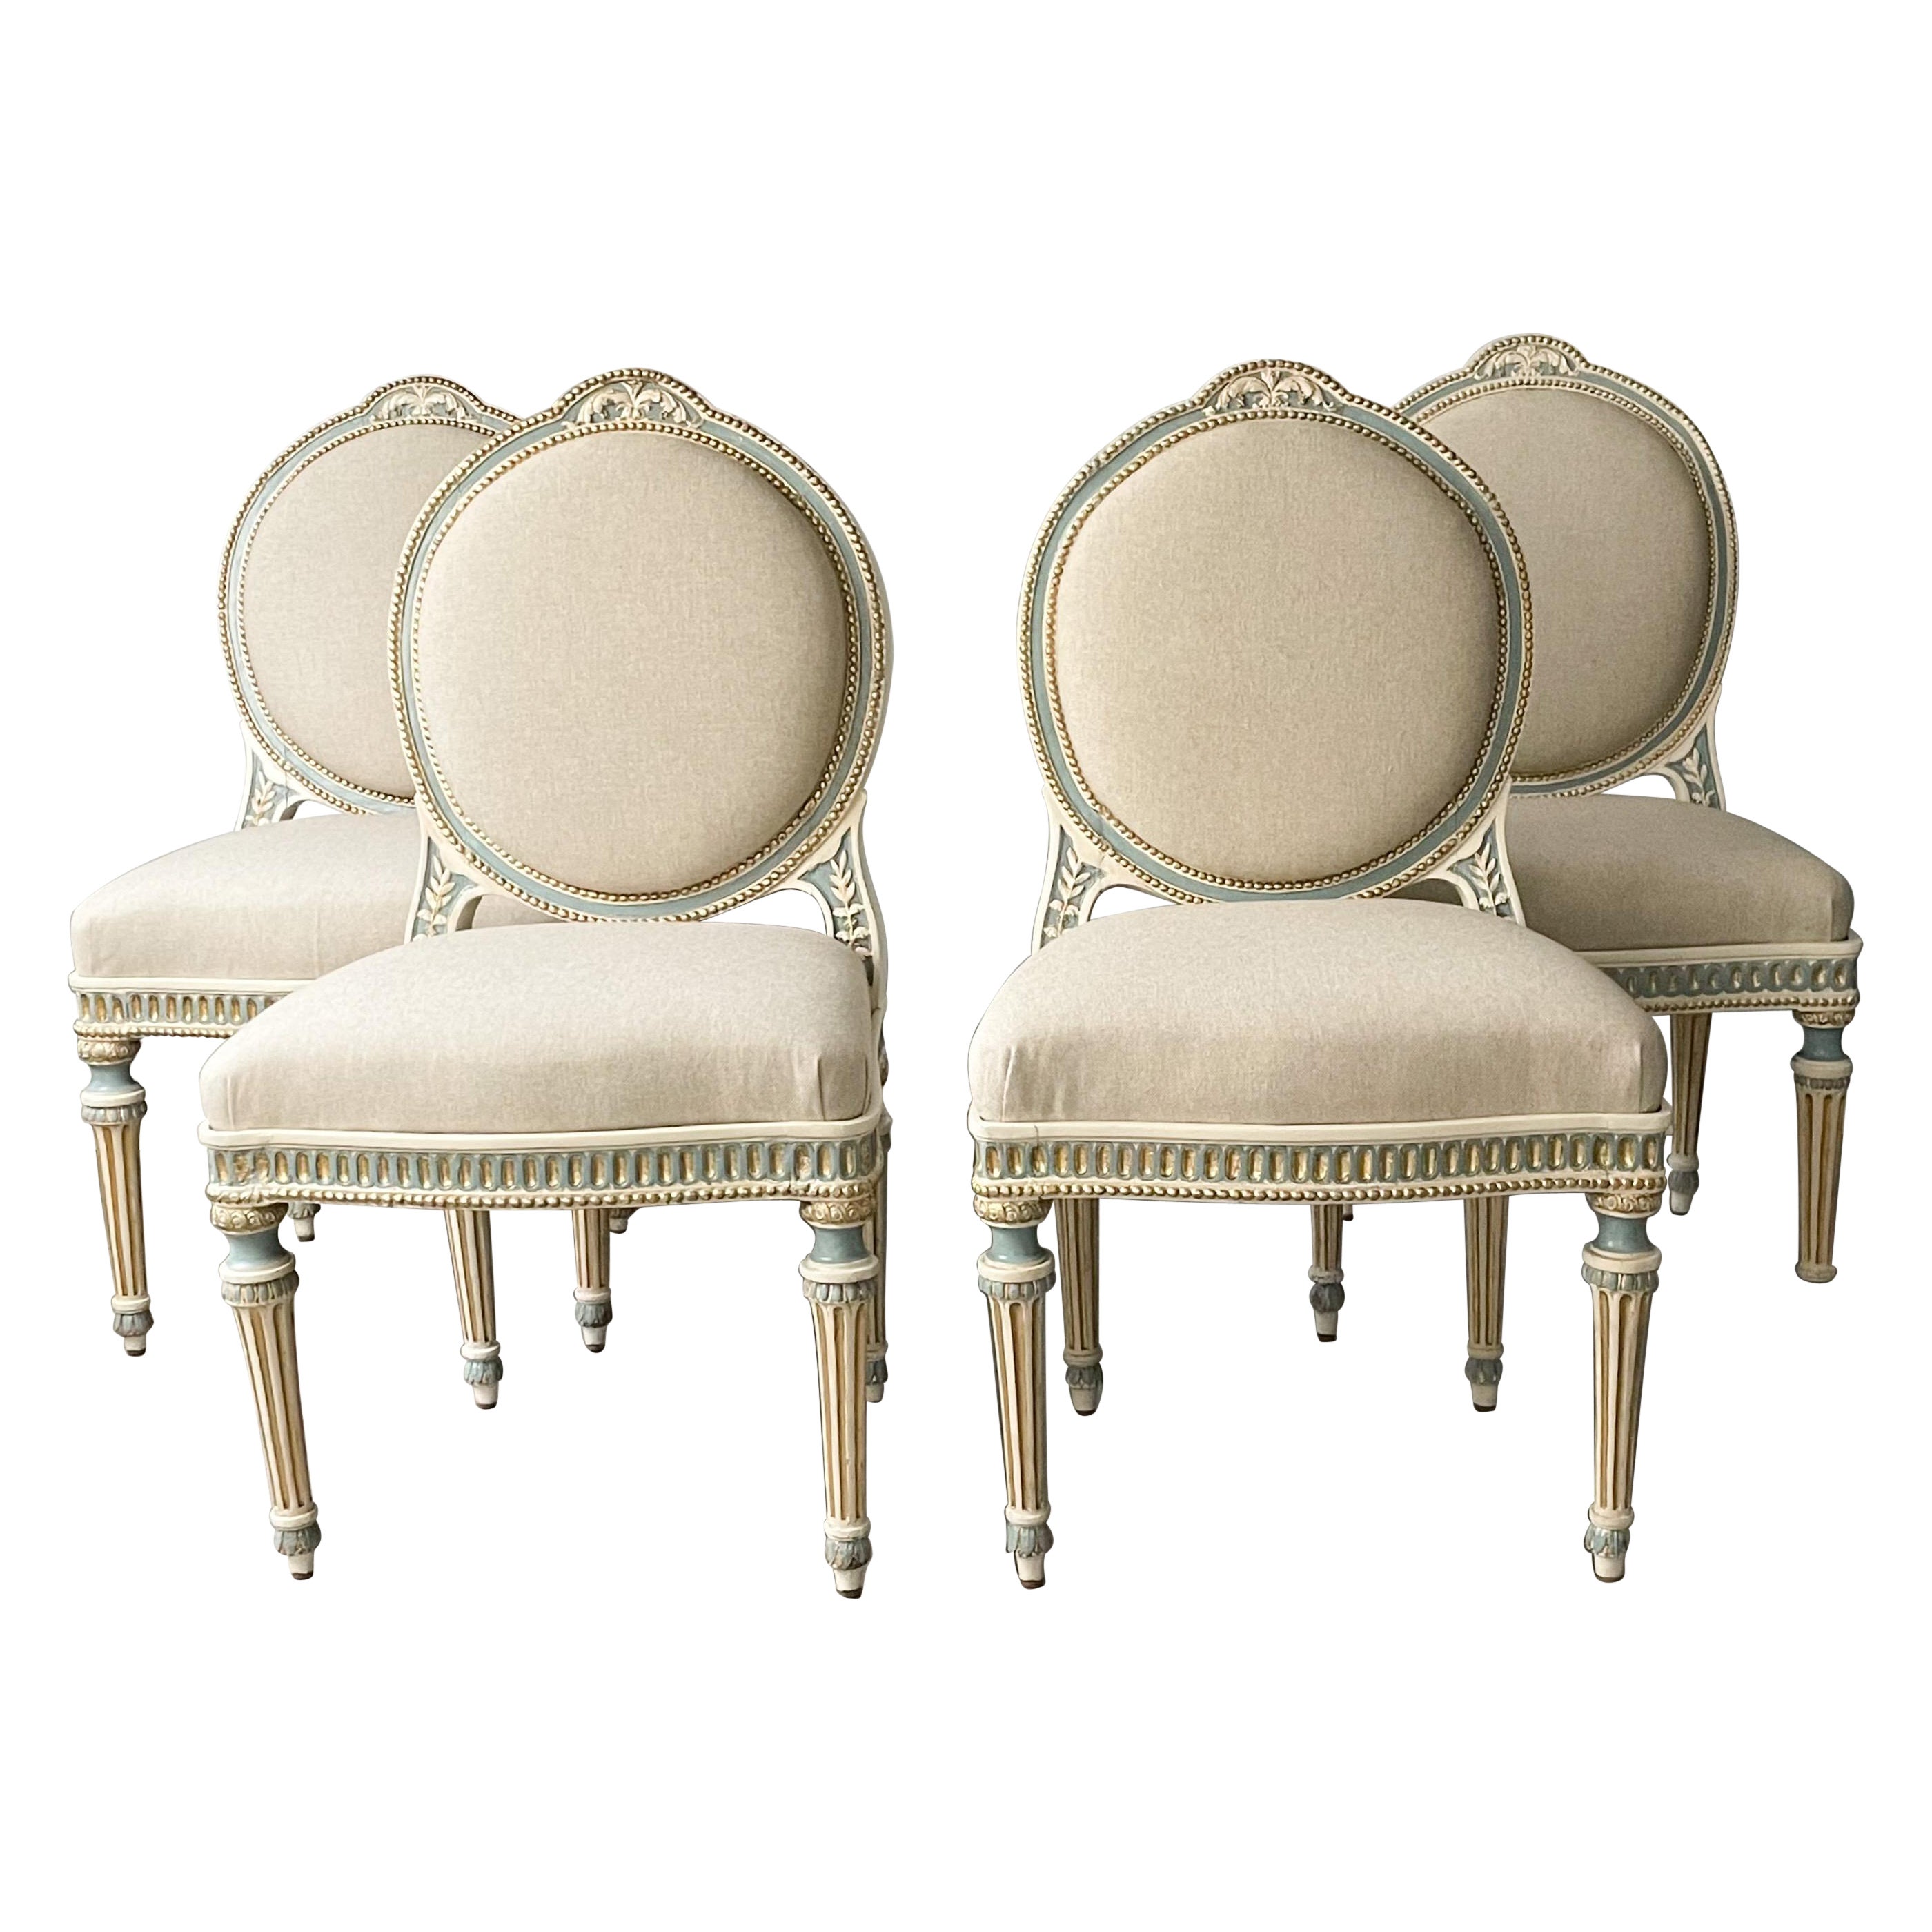 Set Of Four Antique French Louis XVI-Style Chairs For Sale